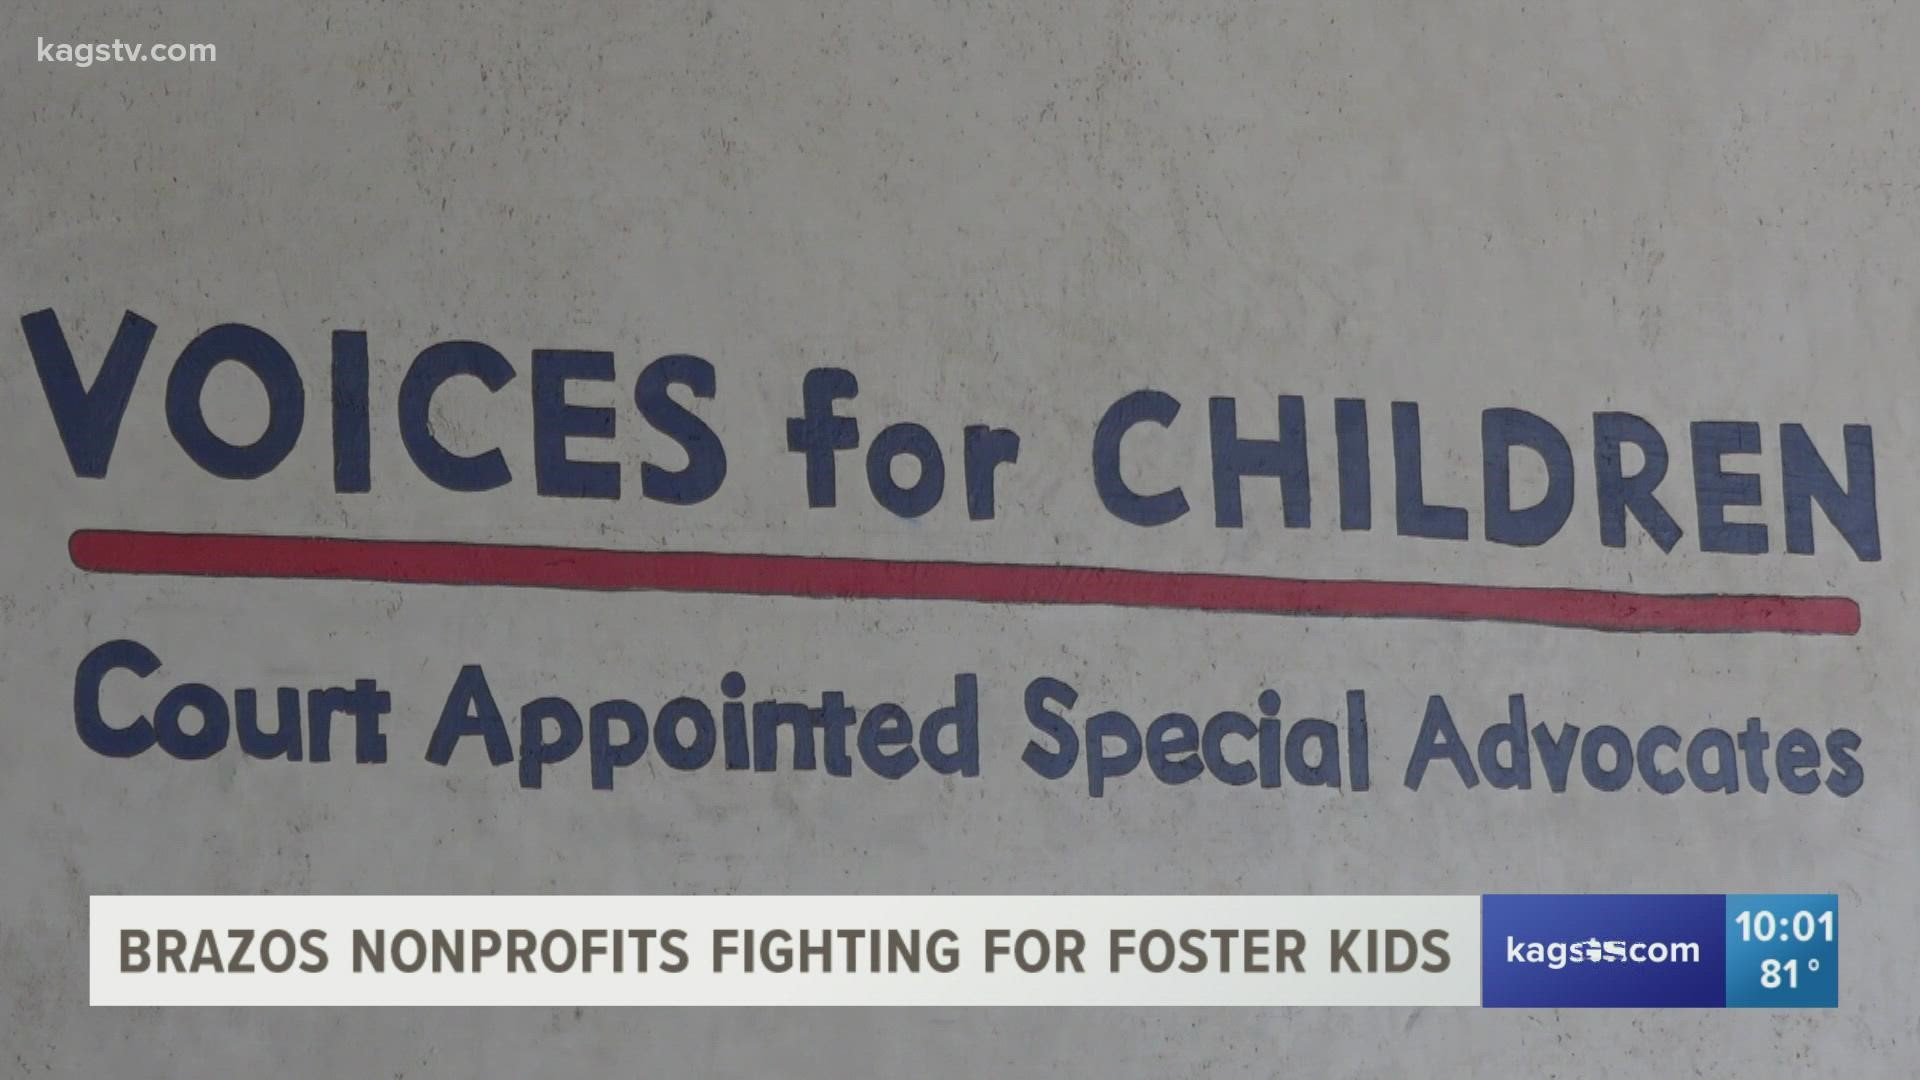 Several organizations are working to ensure kids have a home